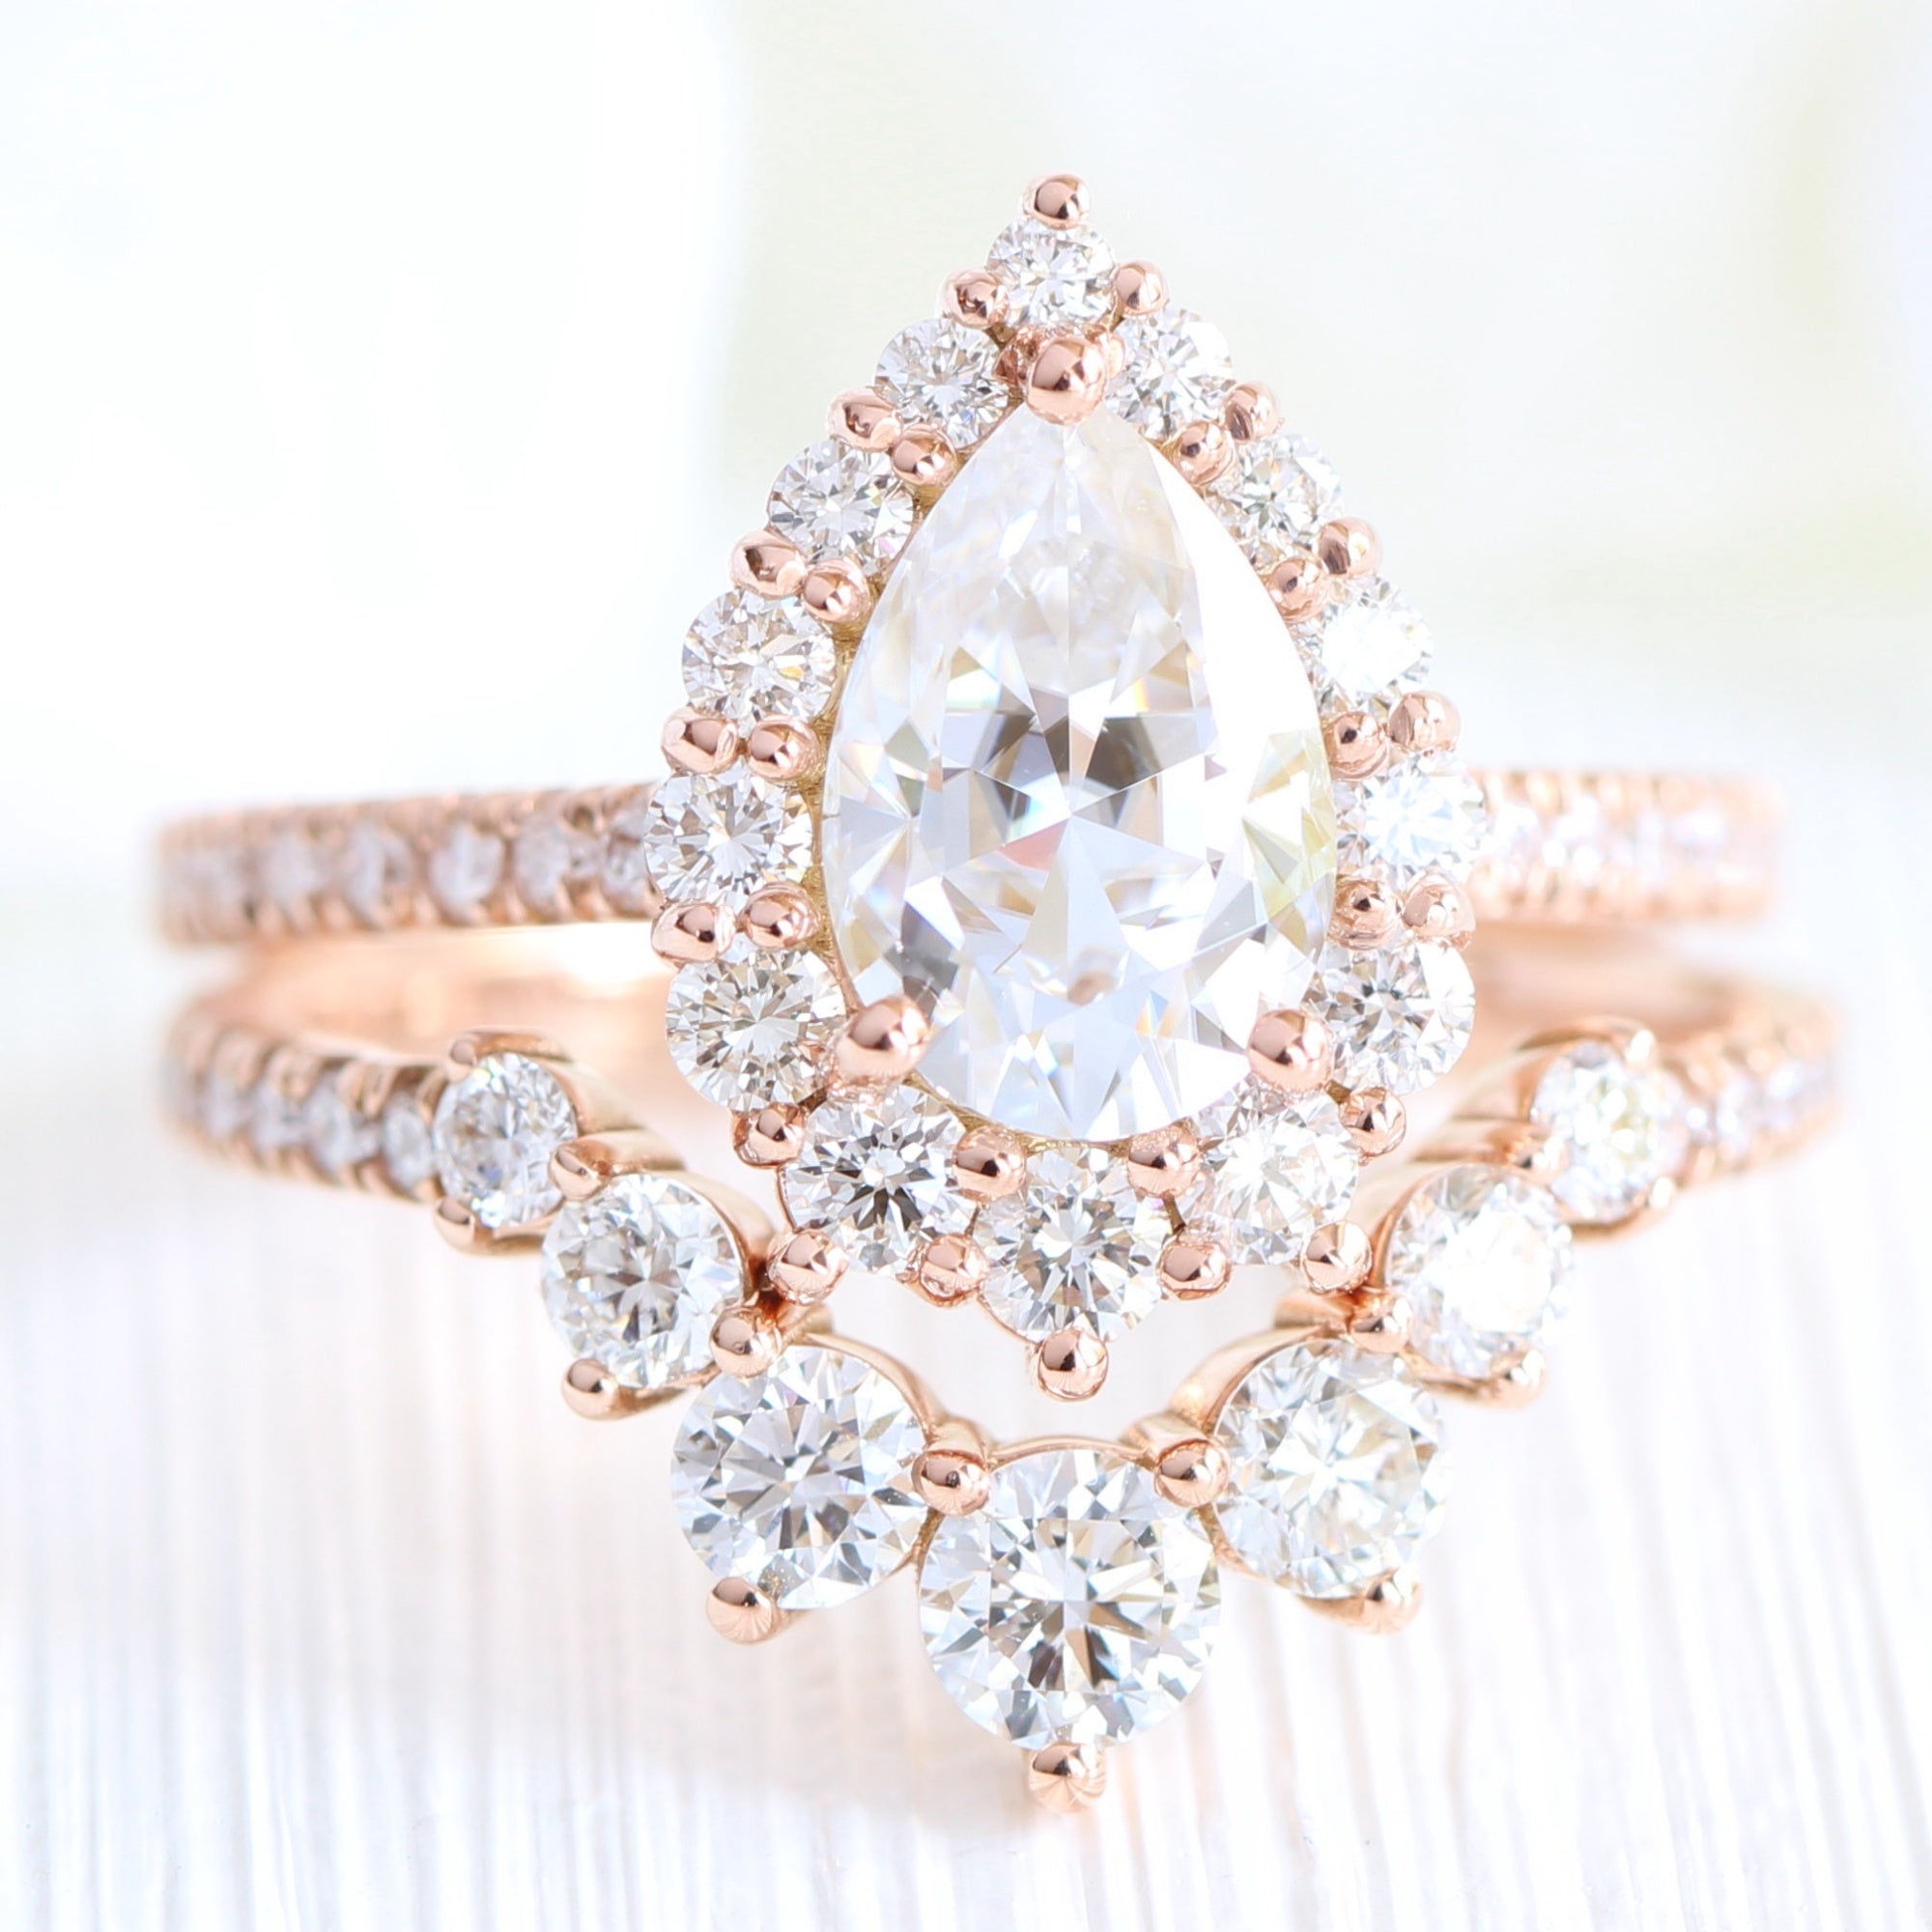 Halo diamond pear moissanite ring rose gold deep curved diamond wedding ring stack la more design jewelry